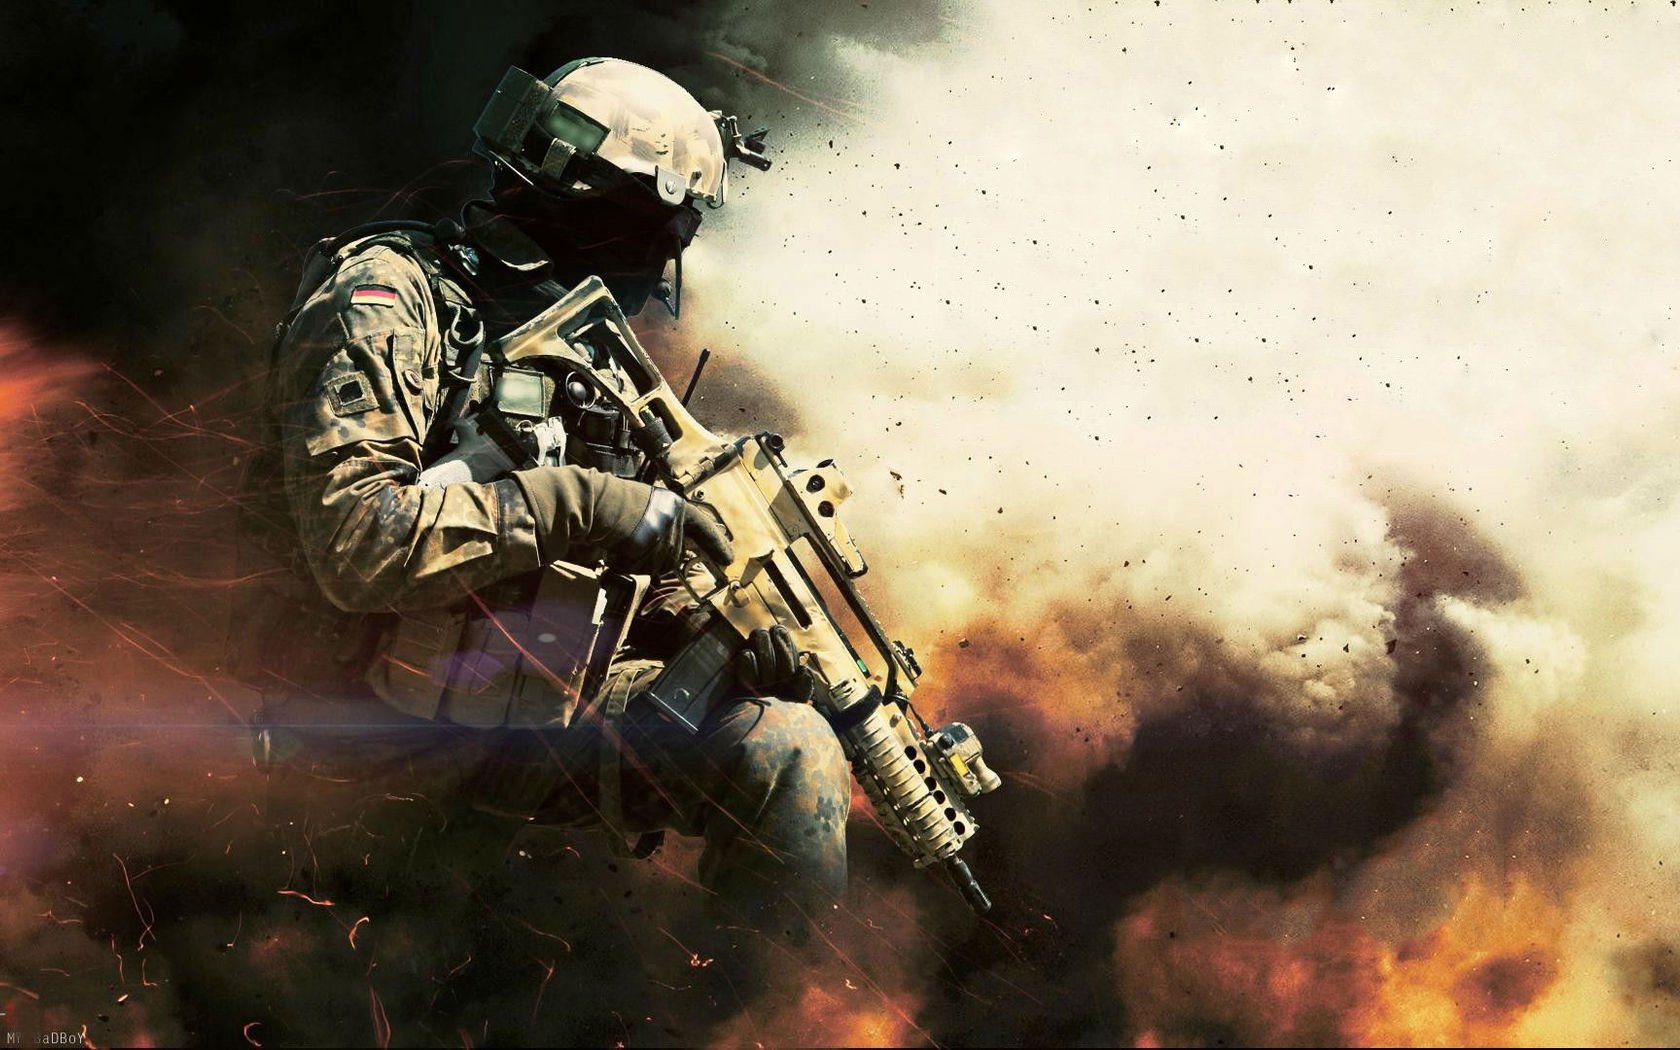 action wallpaper,soldier,military,army,infantry,military organization